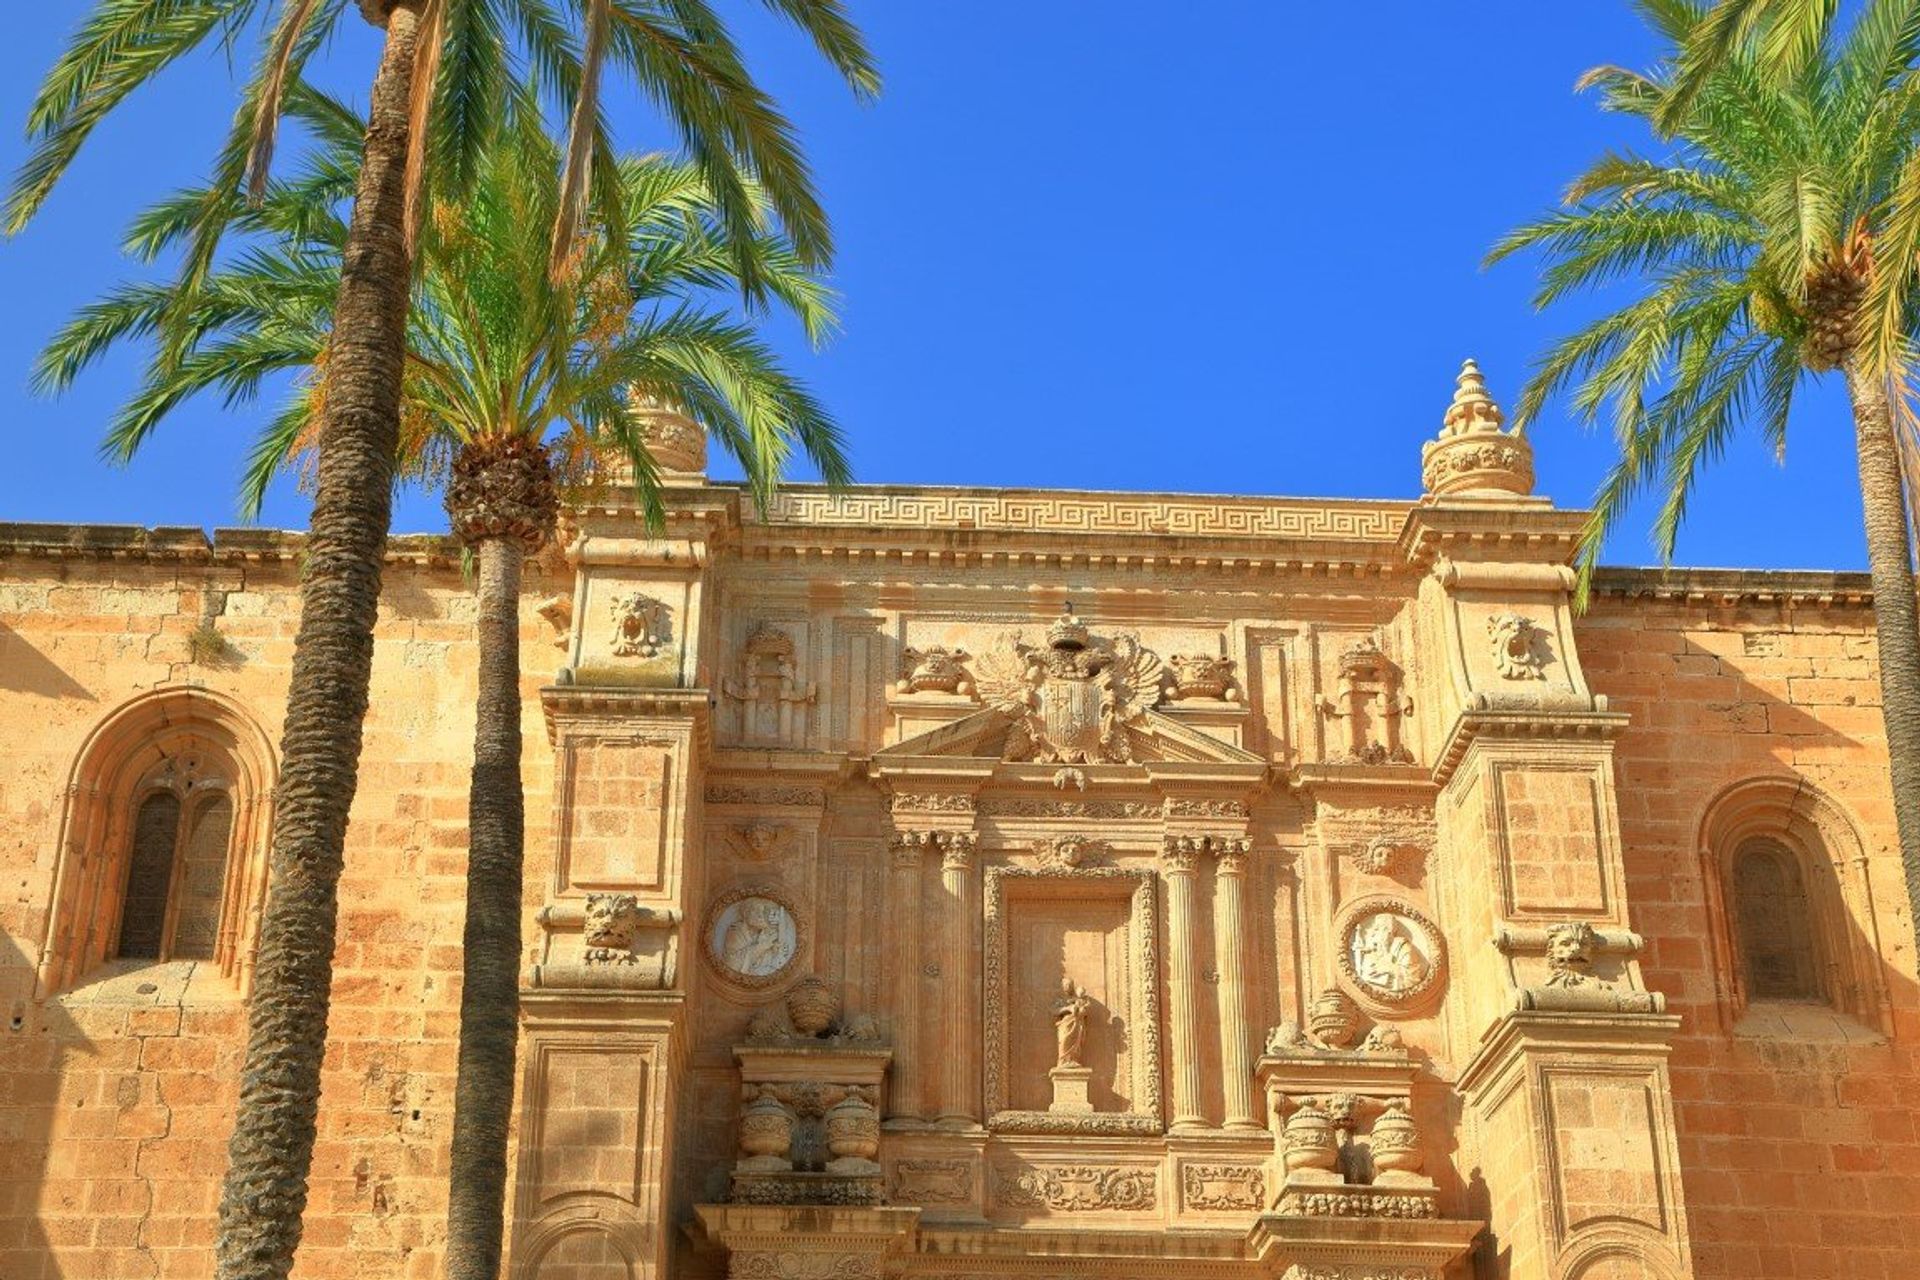 Almería Cathedral is a an exquisite example of 15th century Renaissance architecture